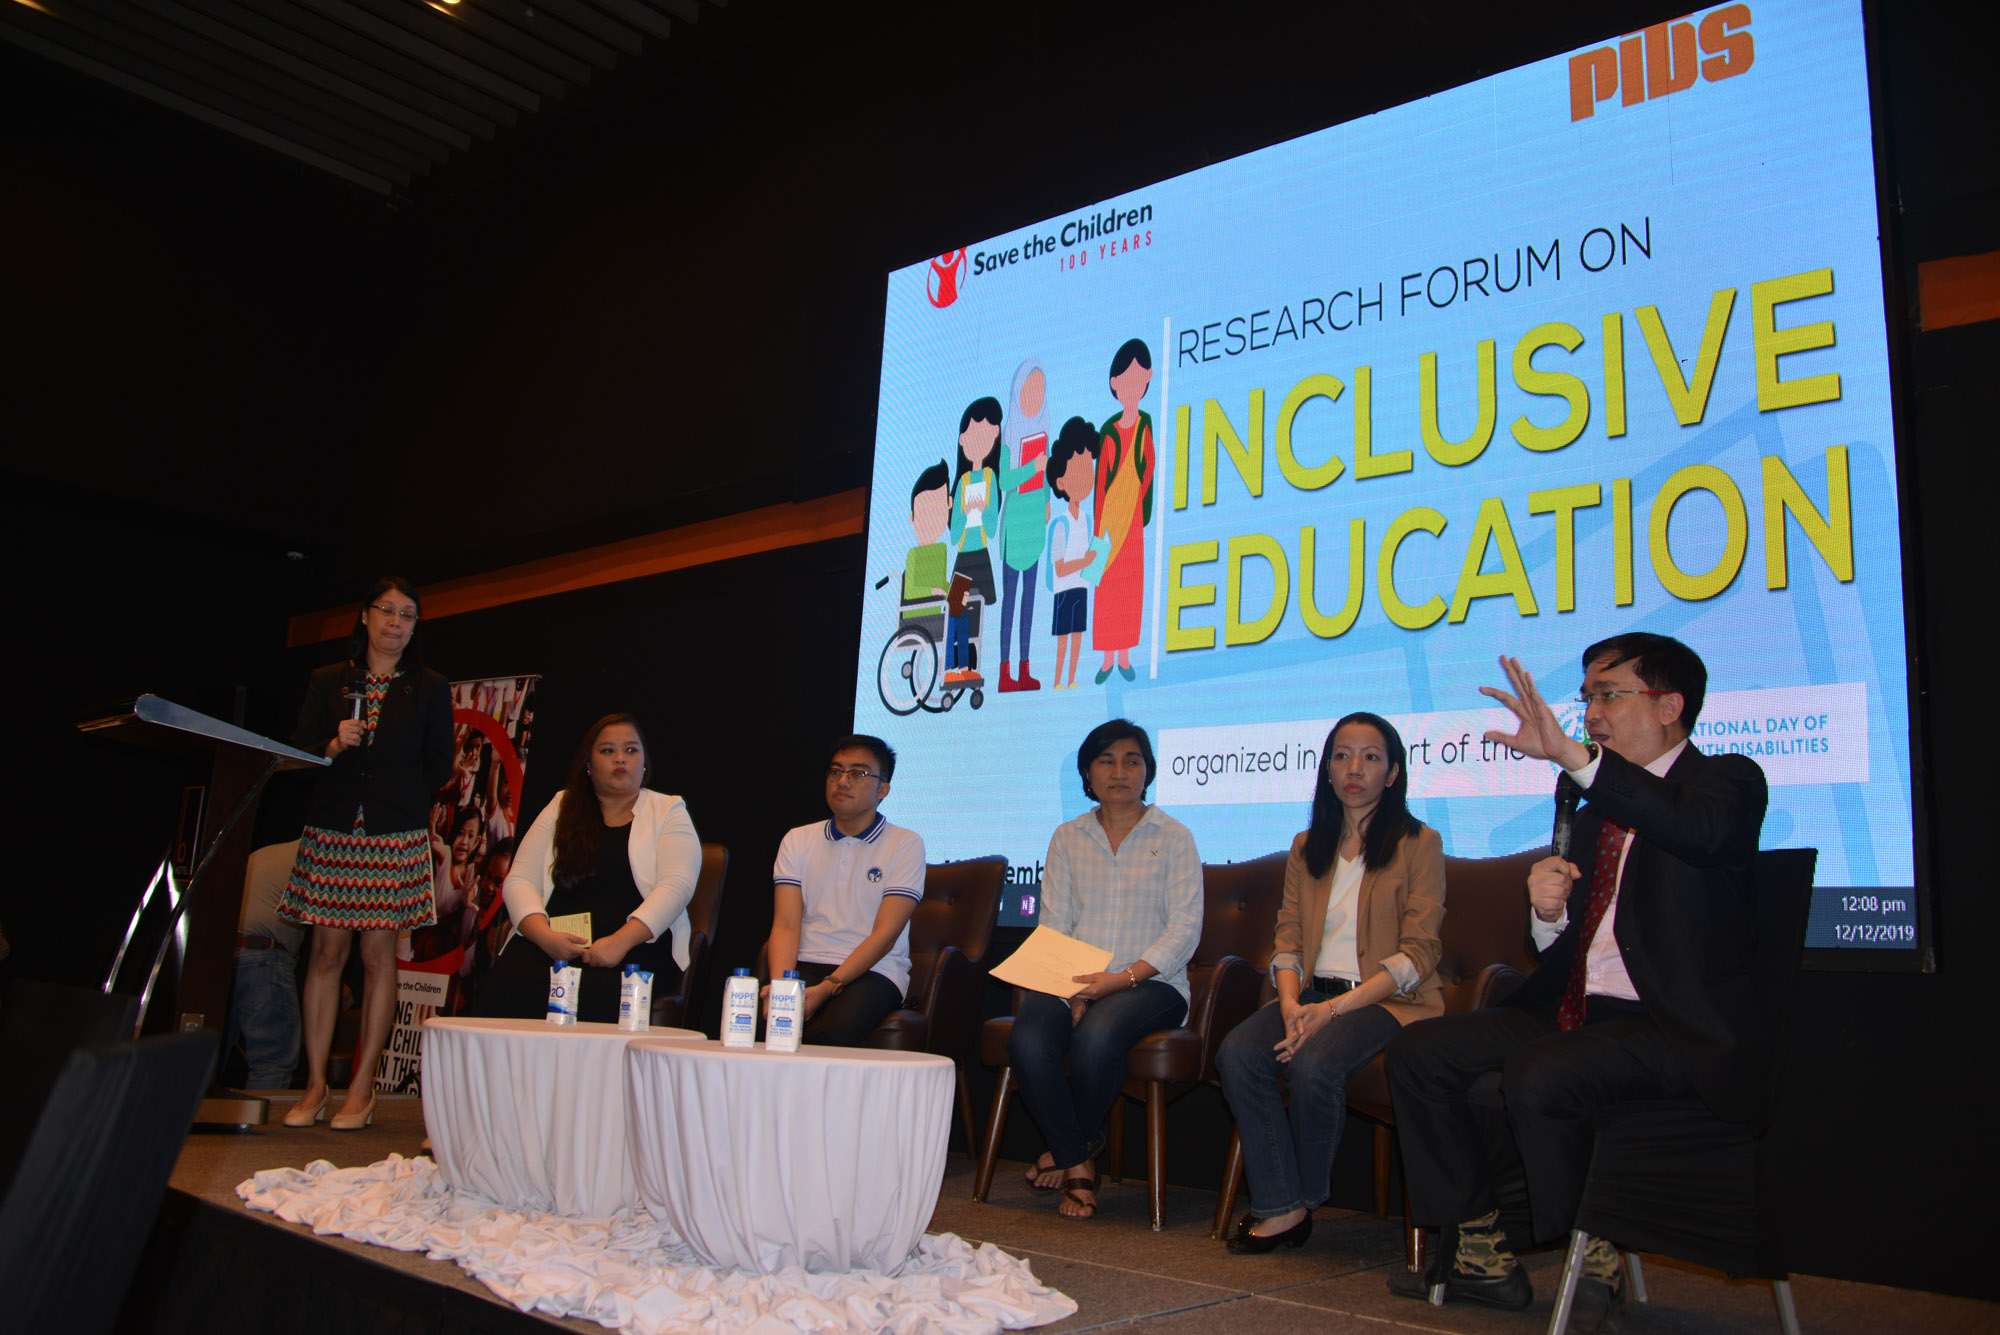 Research Forum on Inclusive Education-pids-scp-36-20191212.jpg